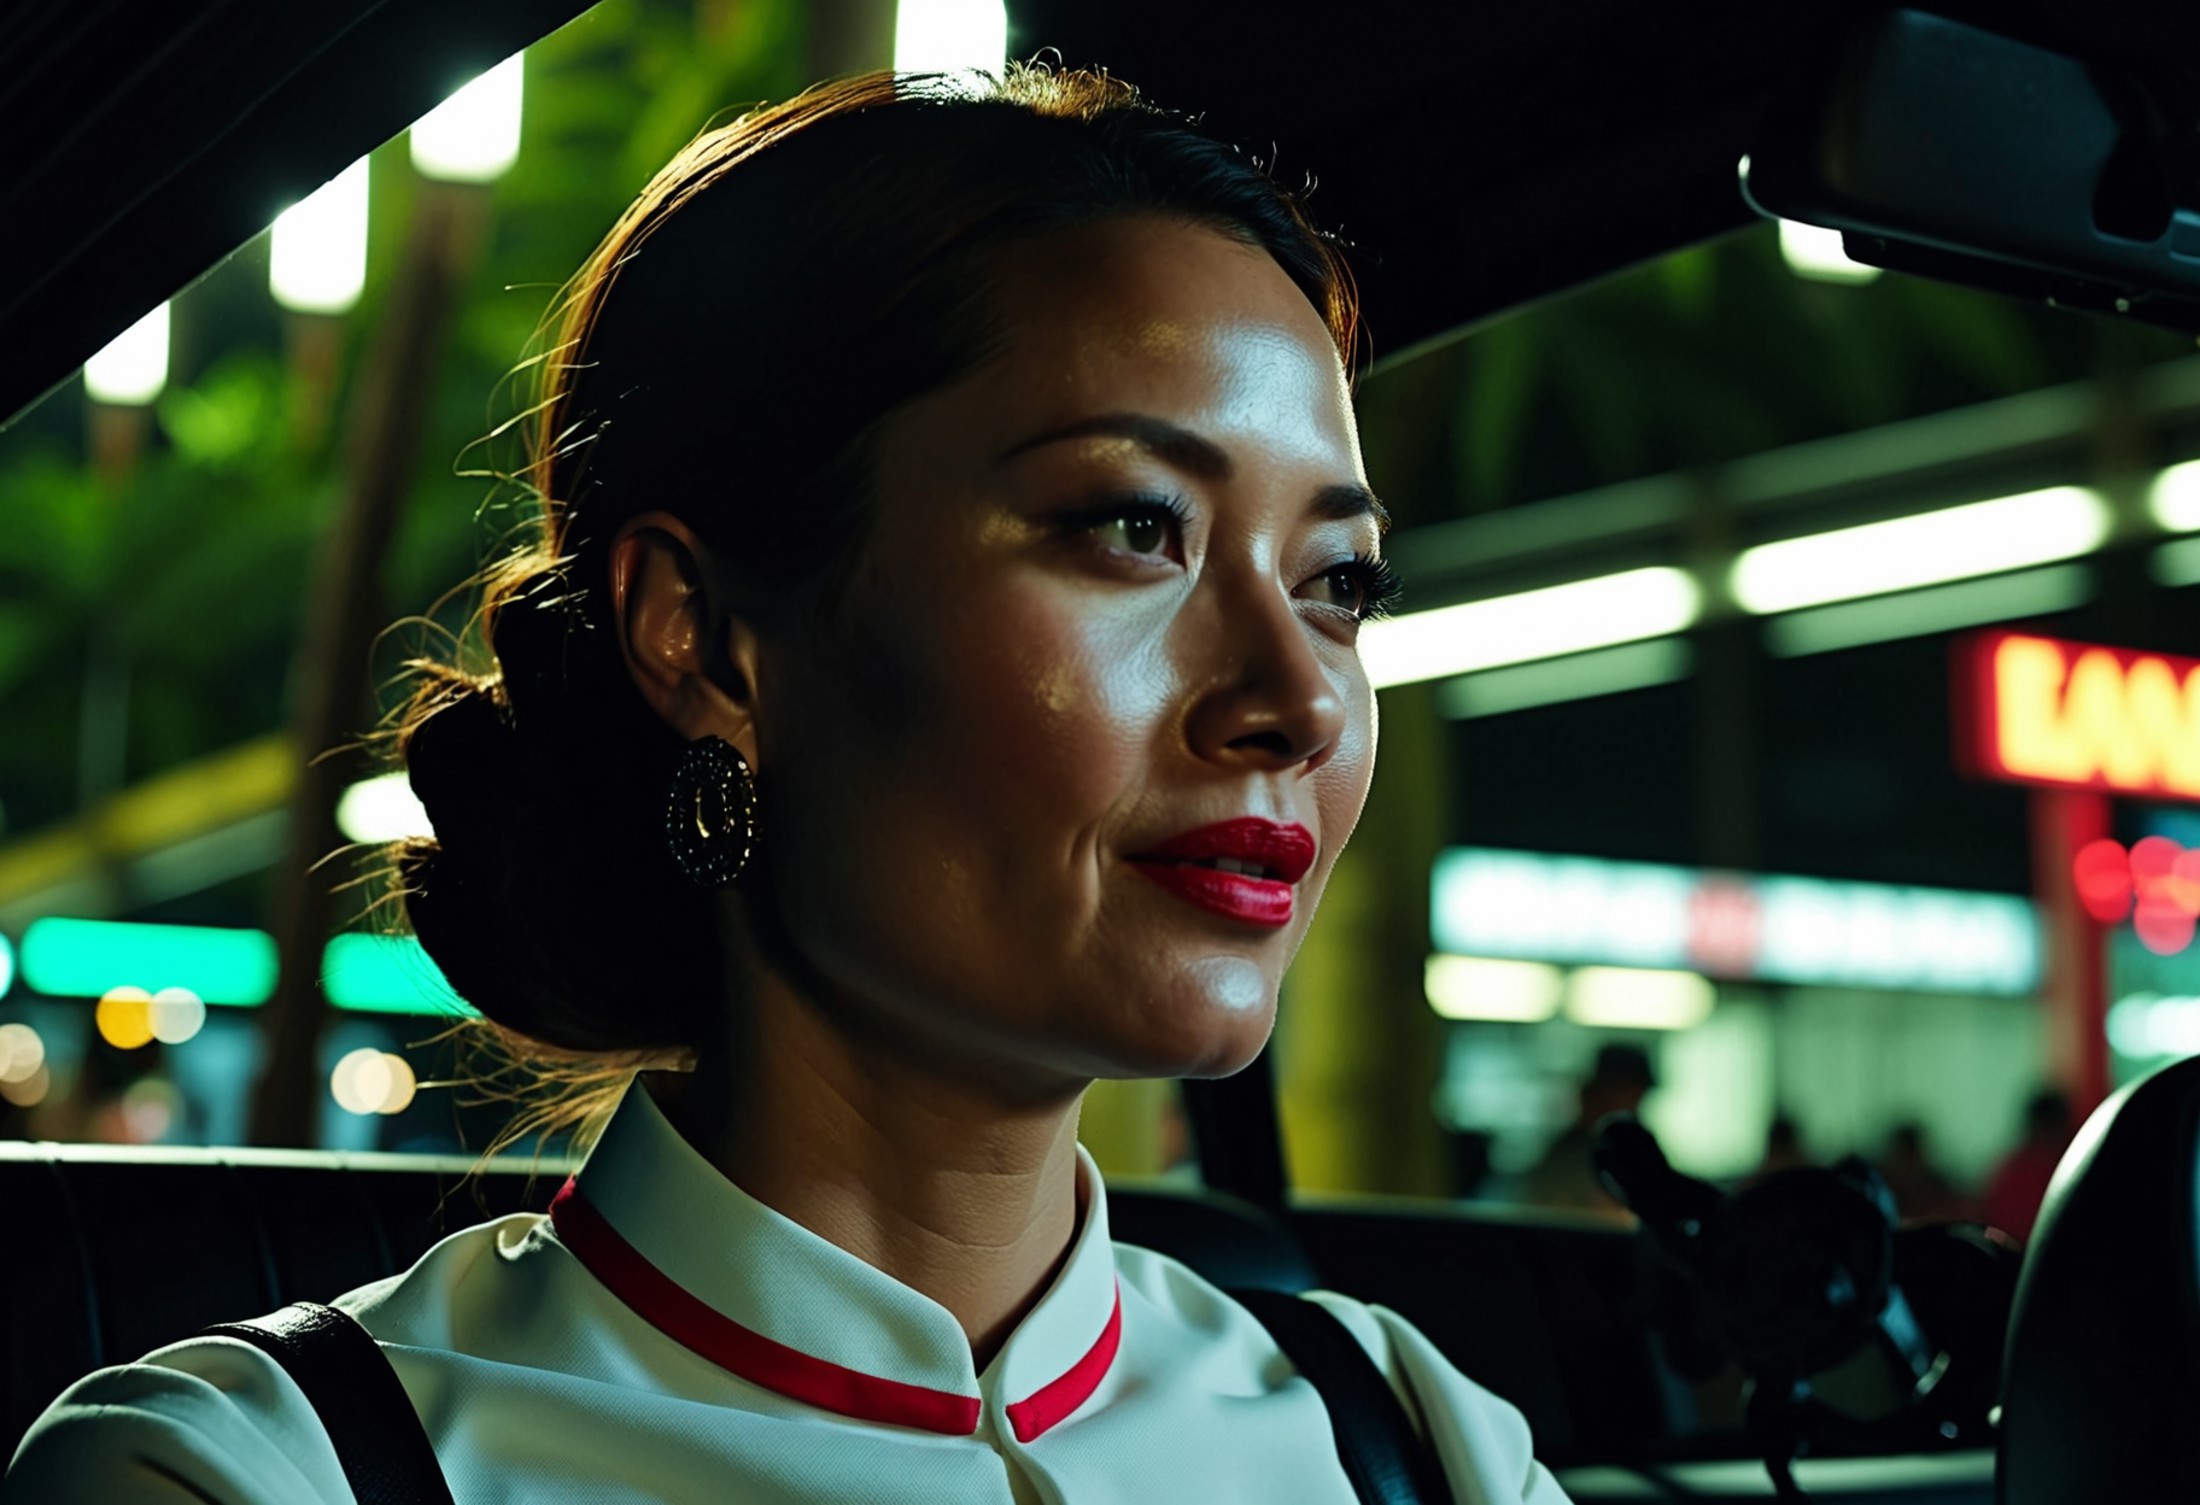 three shot of In a bustling city, a woman wearing a red and white mandarin collar shirt gazes intently towards a camera. T...